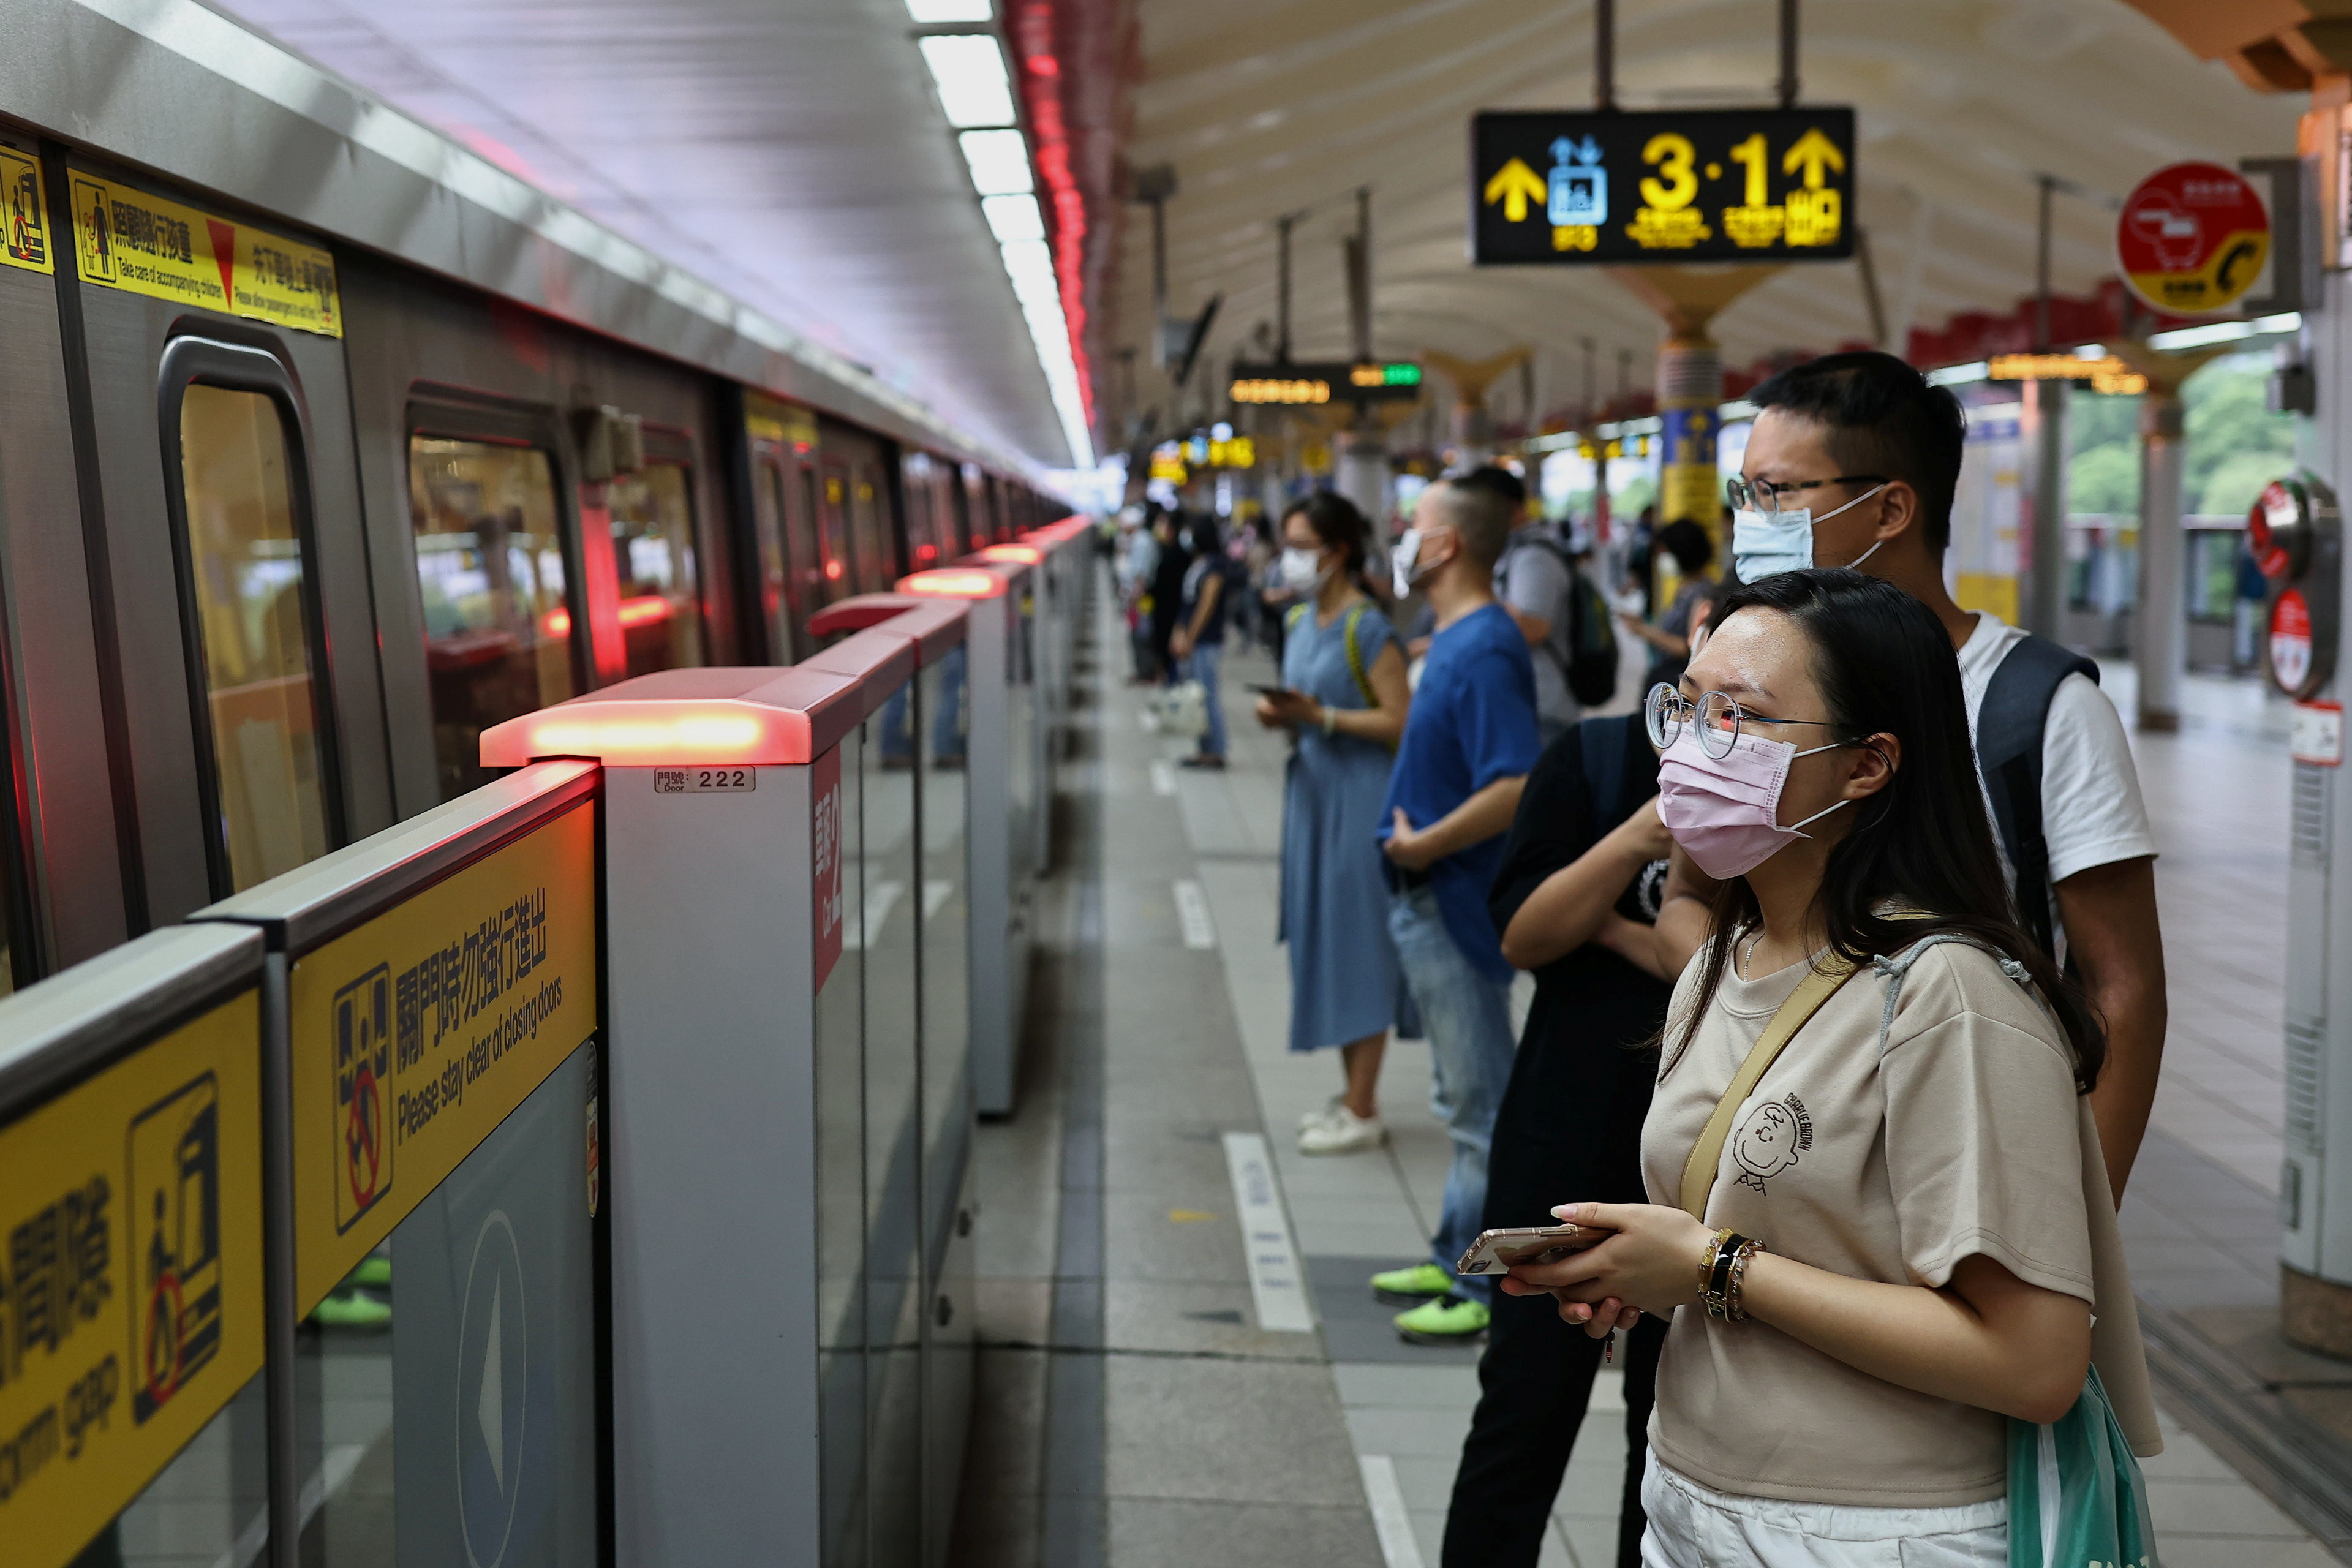 People wearing protective face masks wait for the metro, during the coronavirus disease (COVID-19) pandemic, in Taipei